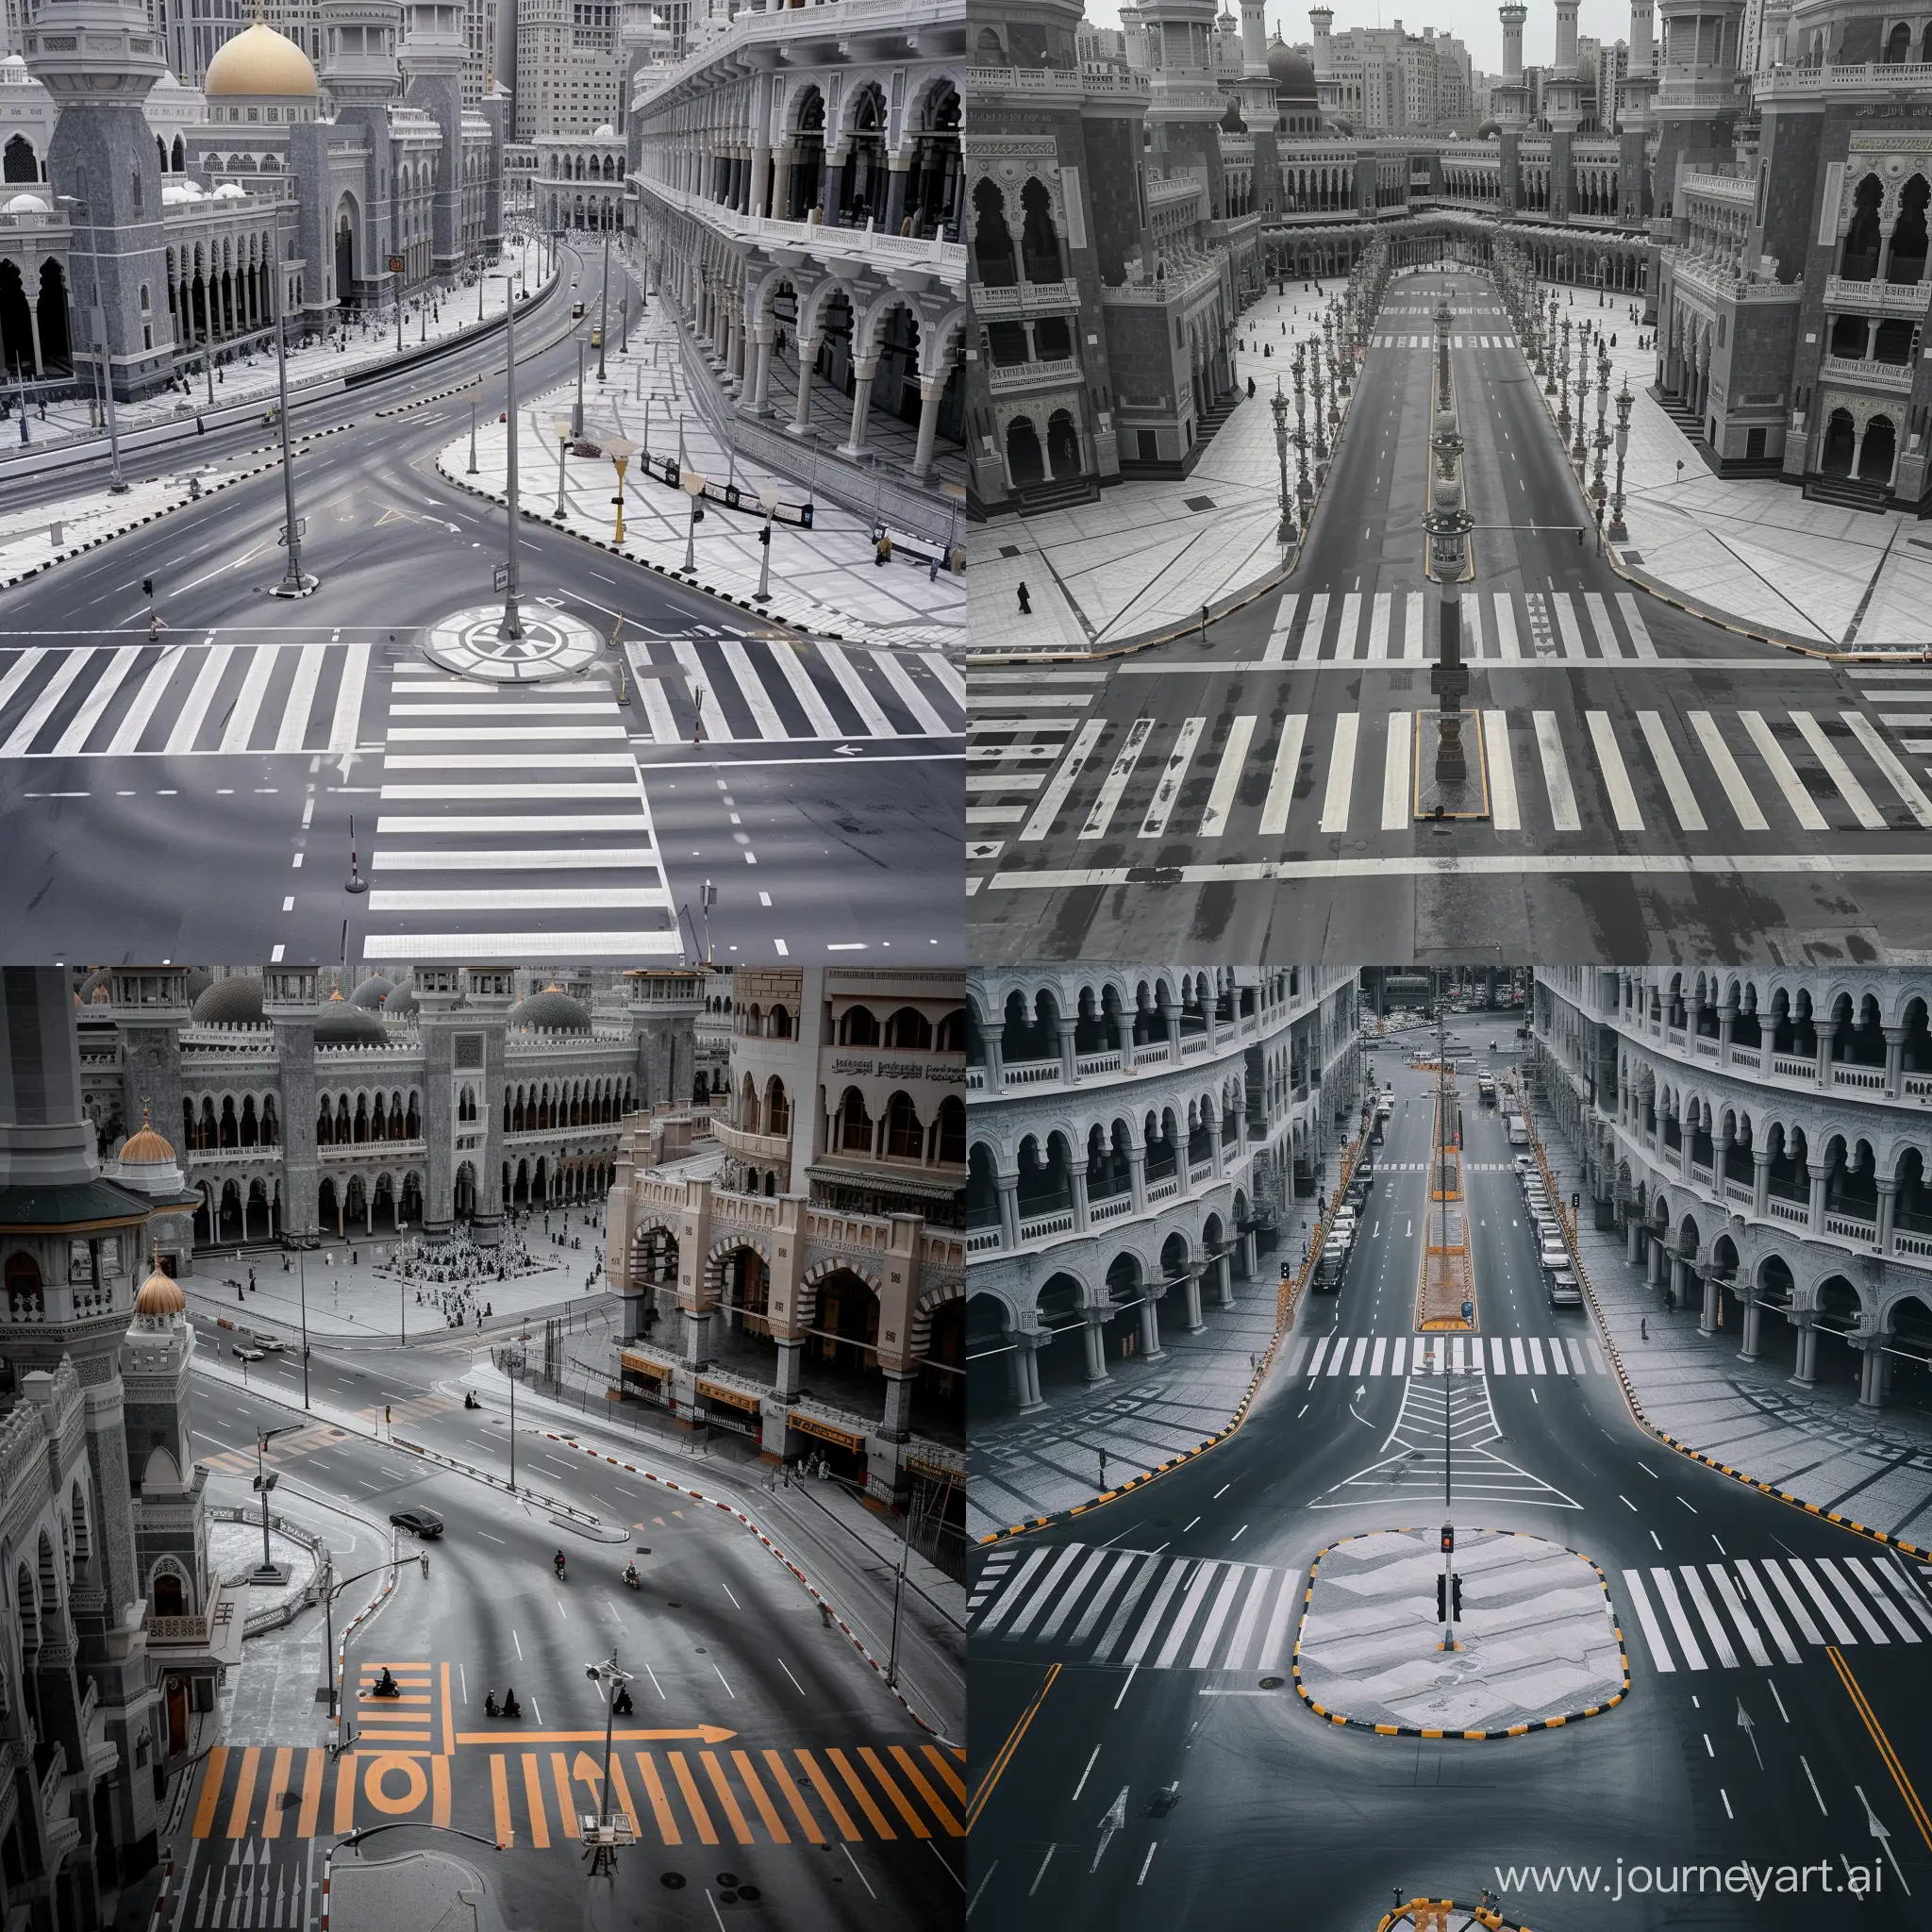 a Kuala Lampur style crosswalk at intersection of two traffic streets in great mosque of mecca, Full of many Mecca grand mosques having Masjid al Haram exterior lined along the streets, Masjid al Haram facades, grey weather, high view --v 6